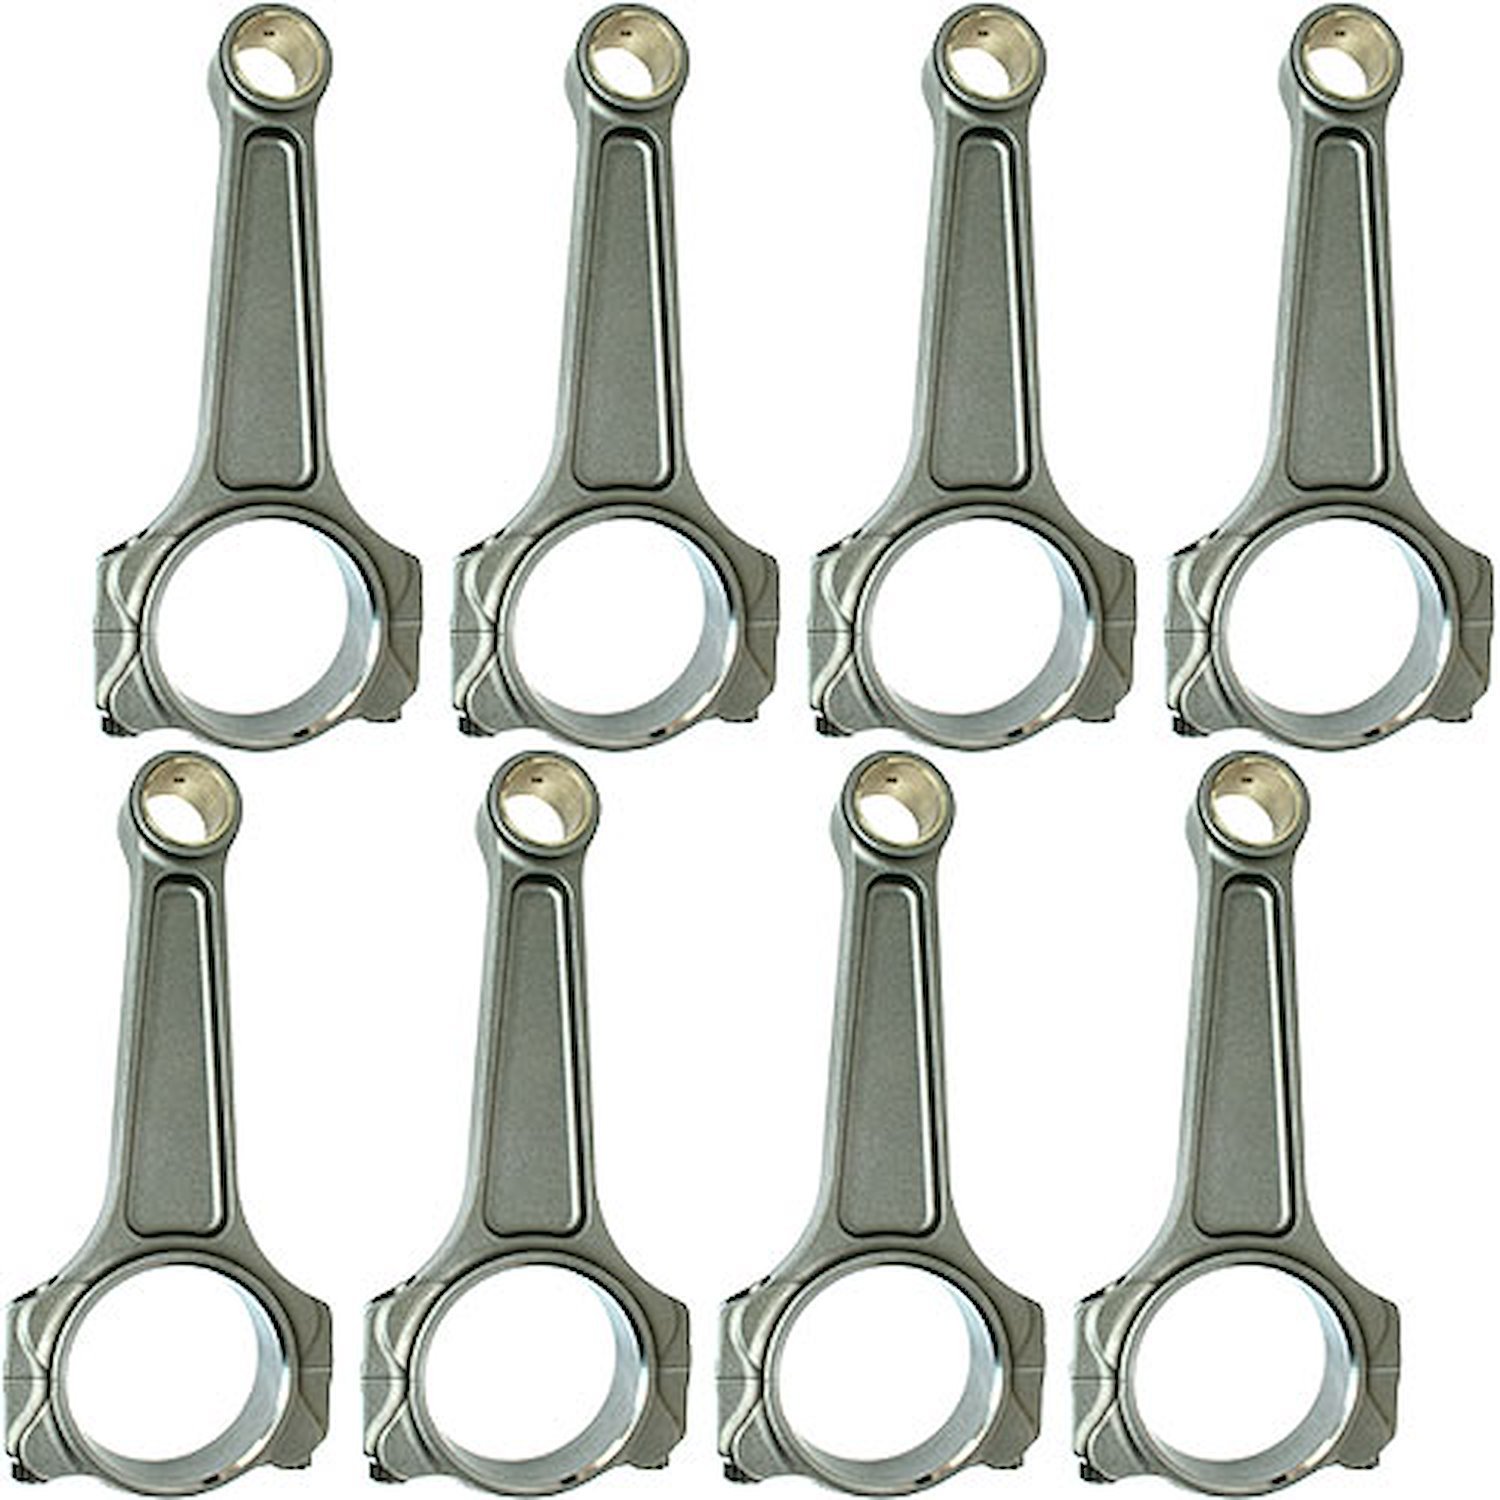 Ford 4.6L Modular Pro Series I-Beam Connecting Rods Heavy Beam Design